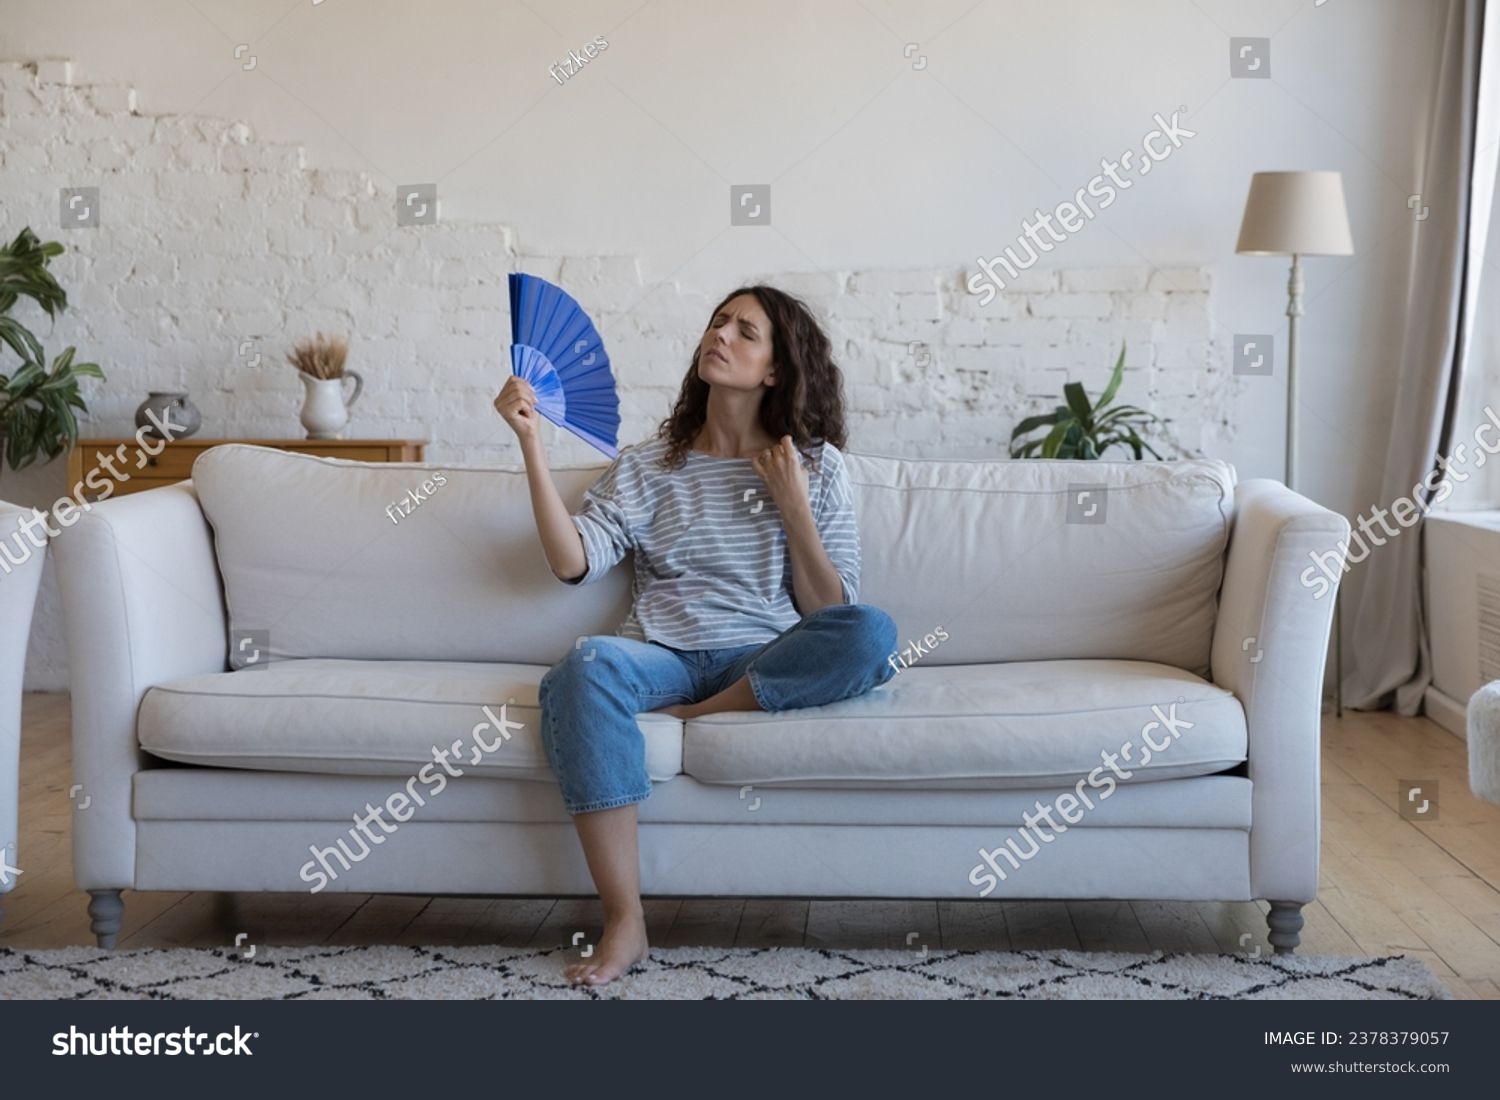 Exhausted frustrated Hispanic woman waving paper handheld fan, cooling hot air, suffering from heat attack, headache, hypoxia, stuffy air, sitting on home couch in living room #2378379057